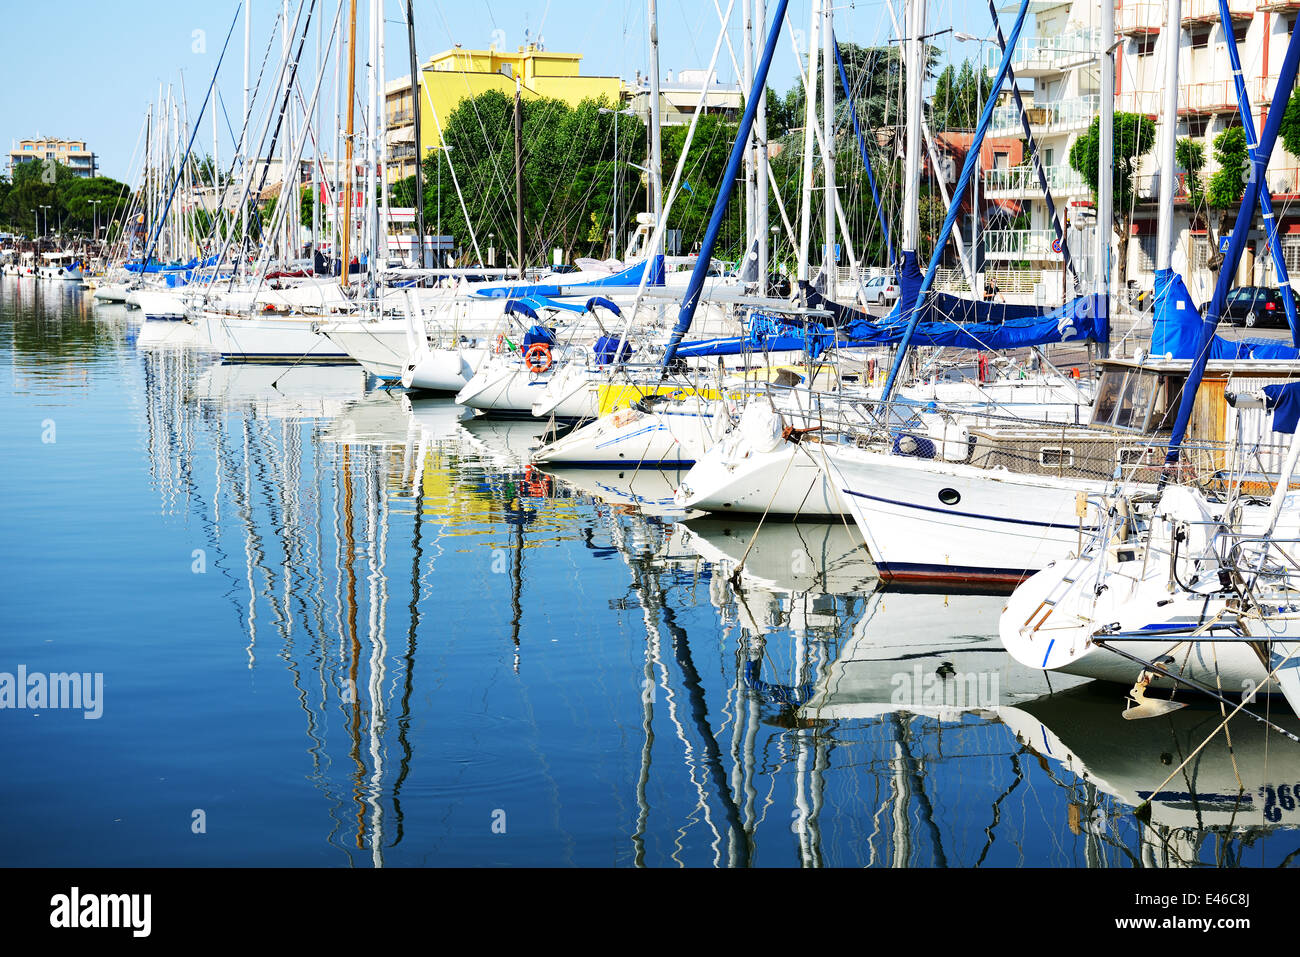 The water channel with parked sail yachts, Rimini, Italy Stock Photo